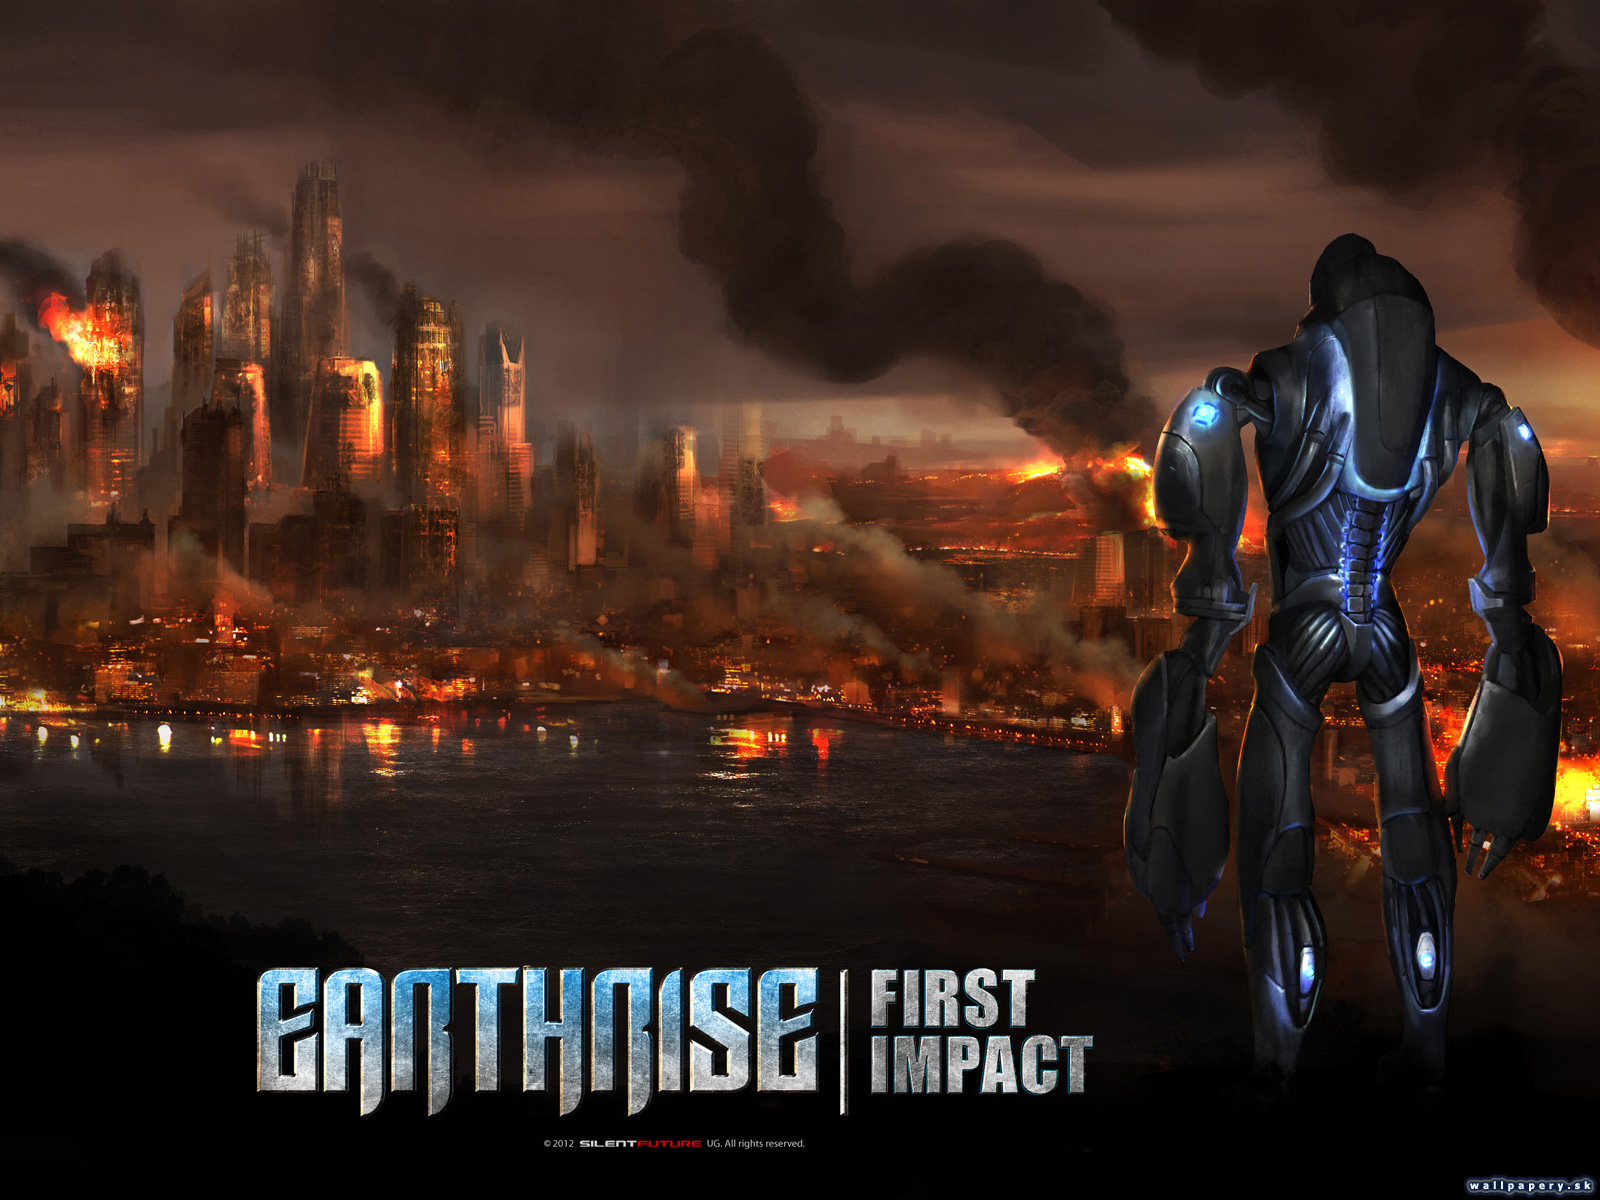 Earthrise: First Impact - wallpaper 3